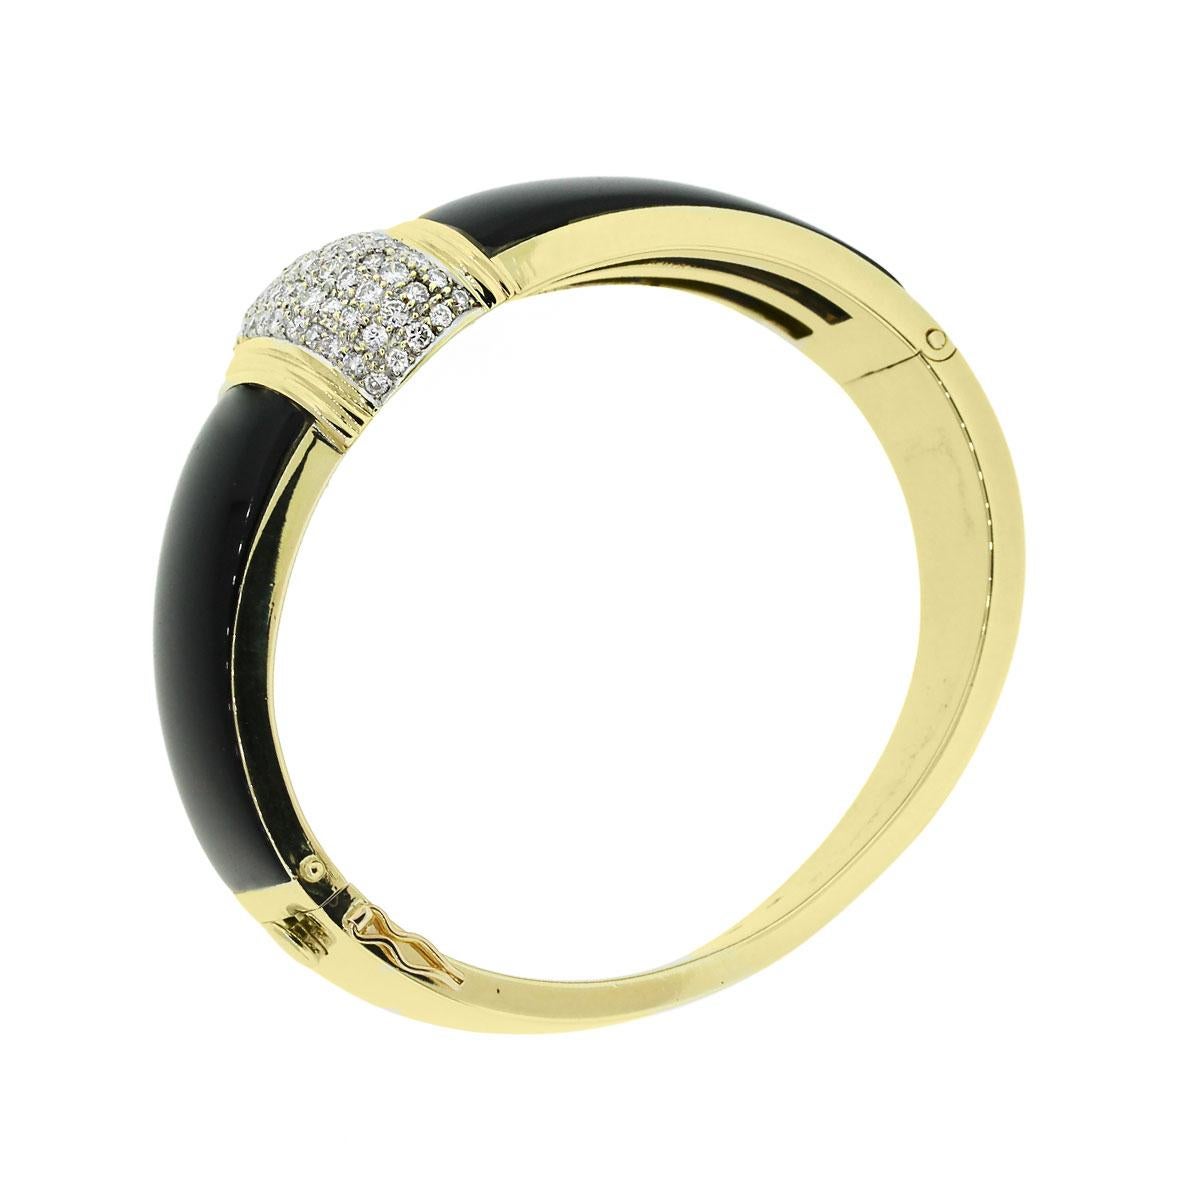 Material: 18k yellow gold
Diamond Details: Approximately 2ctw of round brilliant diamonds. Diamonds are H in color and SI1 in clarity
Gemstone Details: Onyx
Total Weight: 71.5g (46dwt)
Bracelet Measurements: 6.25″ x 1.03″ x 2.50″
Clasp Details: